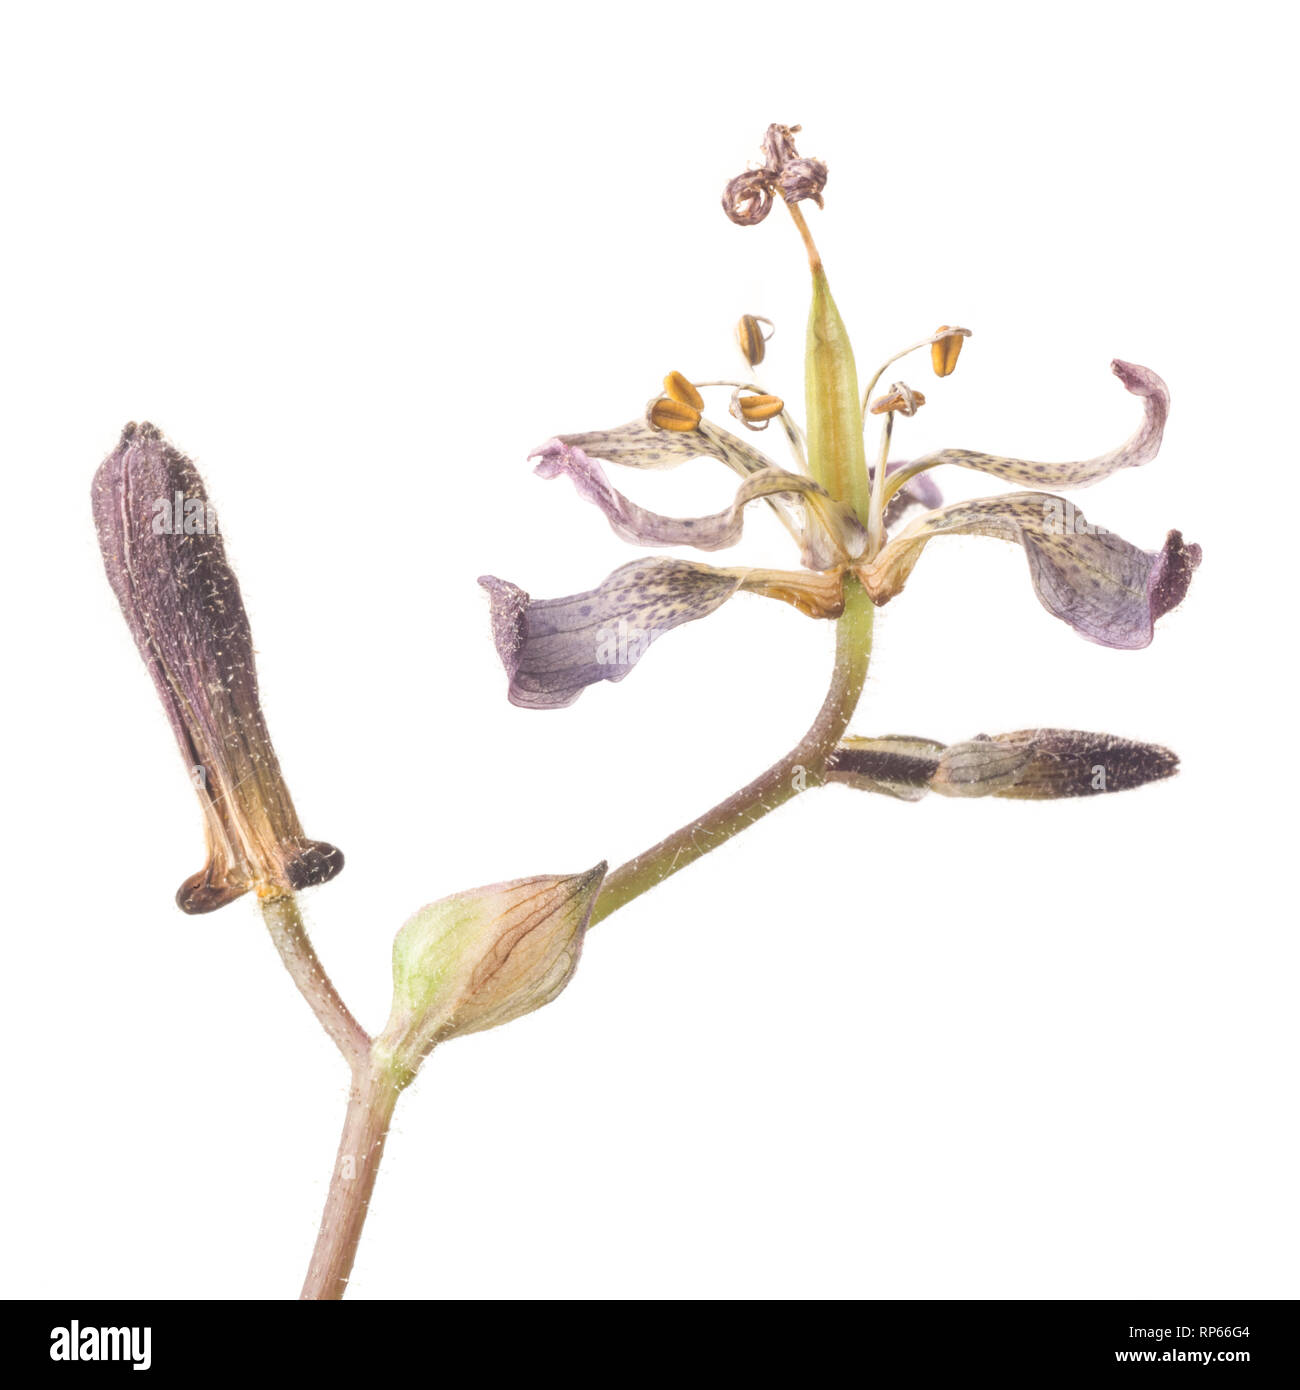 Toad Lily, Tricyrtis hirta, against White Background Stock Photo